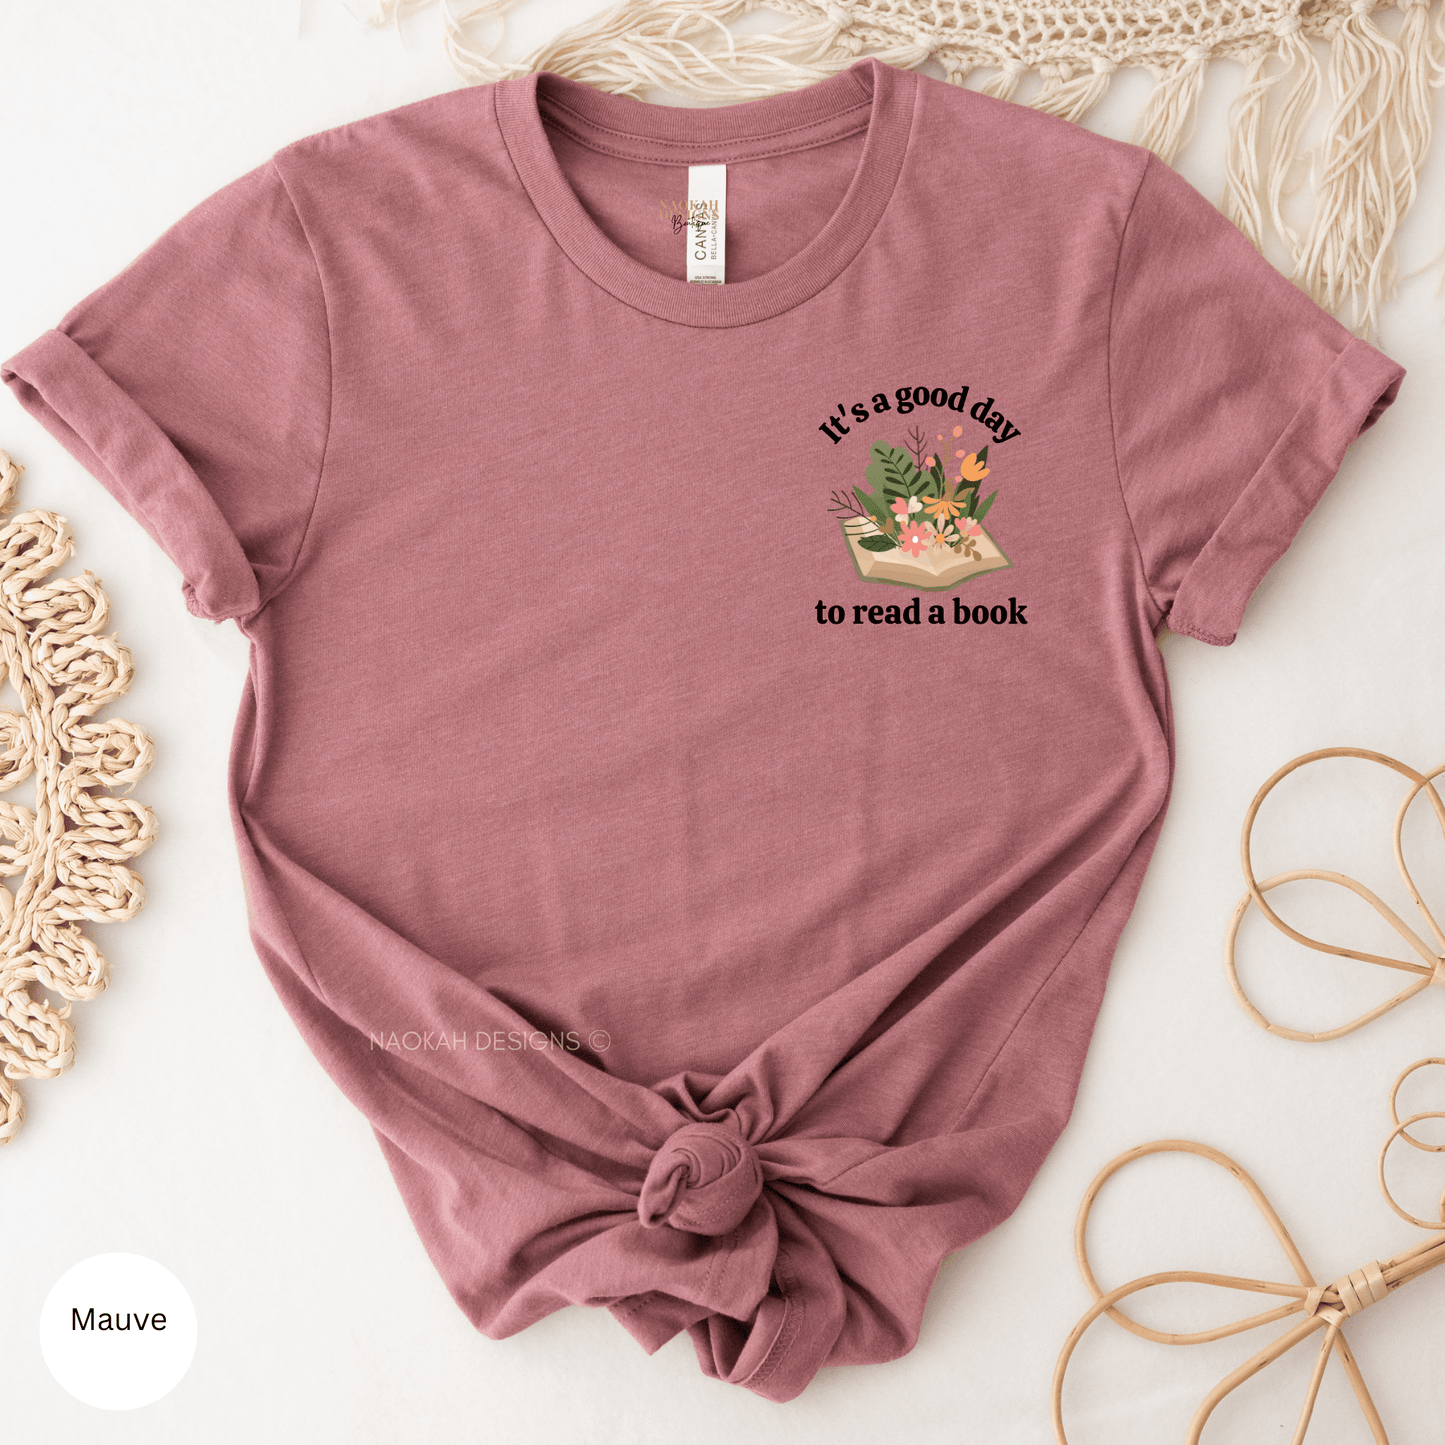 it's a good day to read a book shirt, reading shirt, gift for teacher, book lover gift for women, flower book lover, english teacher, literary shirt, bookish shirt, reading shirt, read banned books shirt